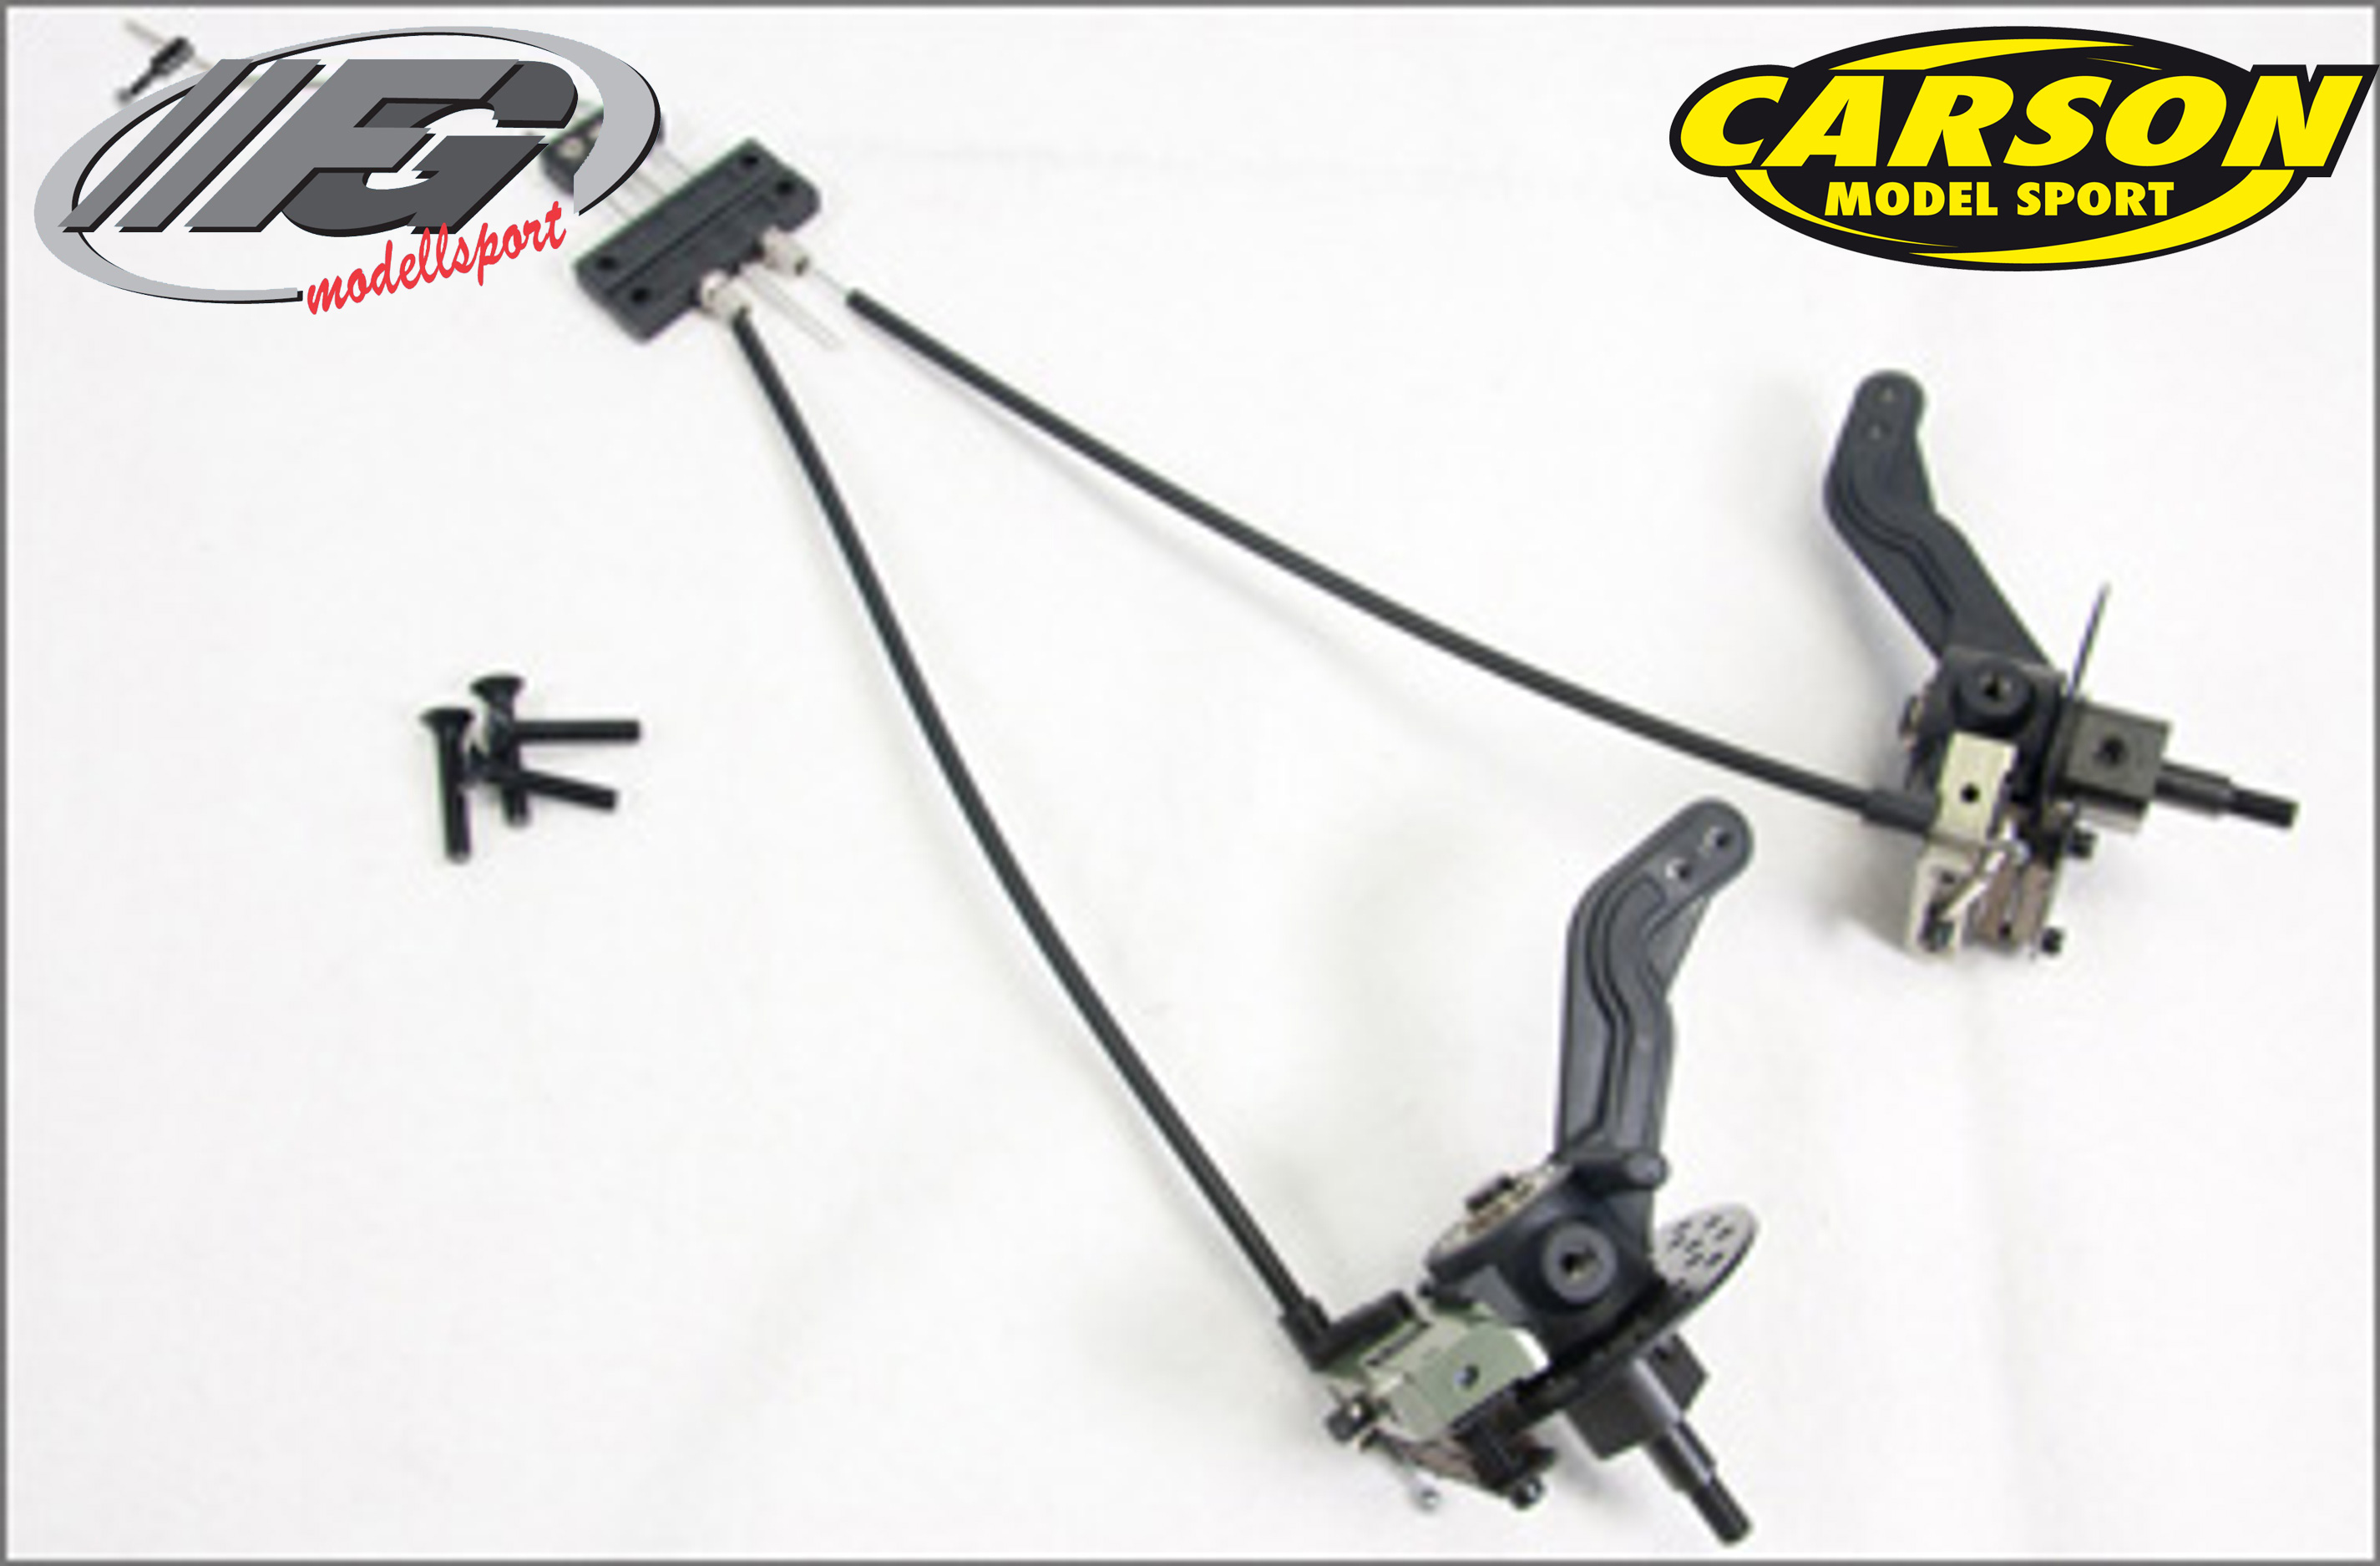 y1075 Front brake system for FG Marder, FG Off-Road Buggy and for Carson / Smartech 2WD offroad cars incl. uprights, bearings and axles